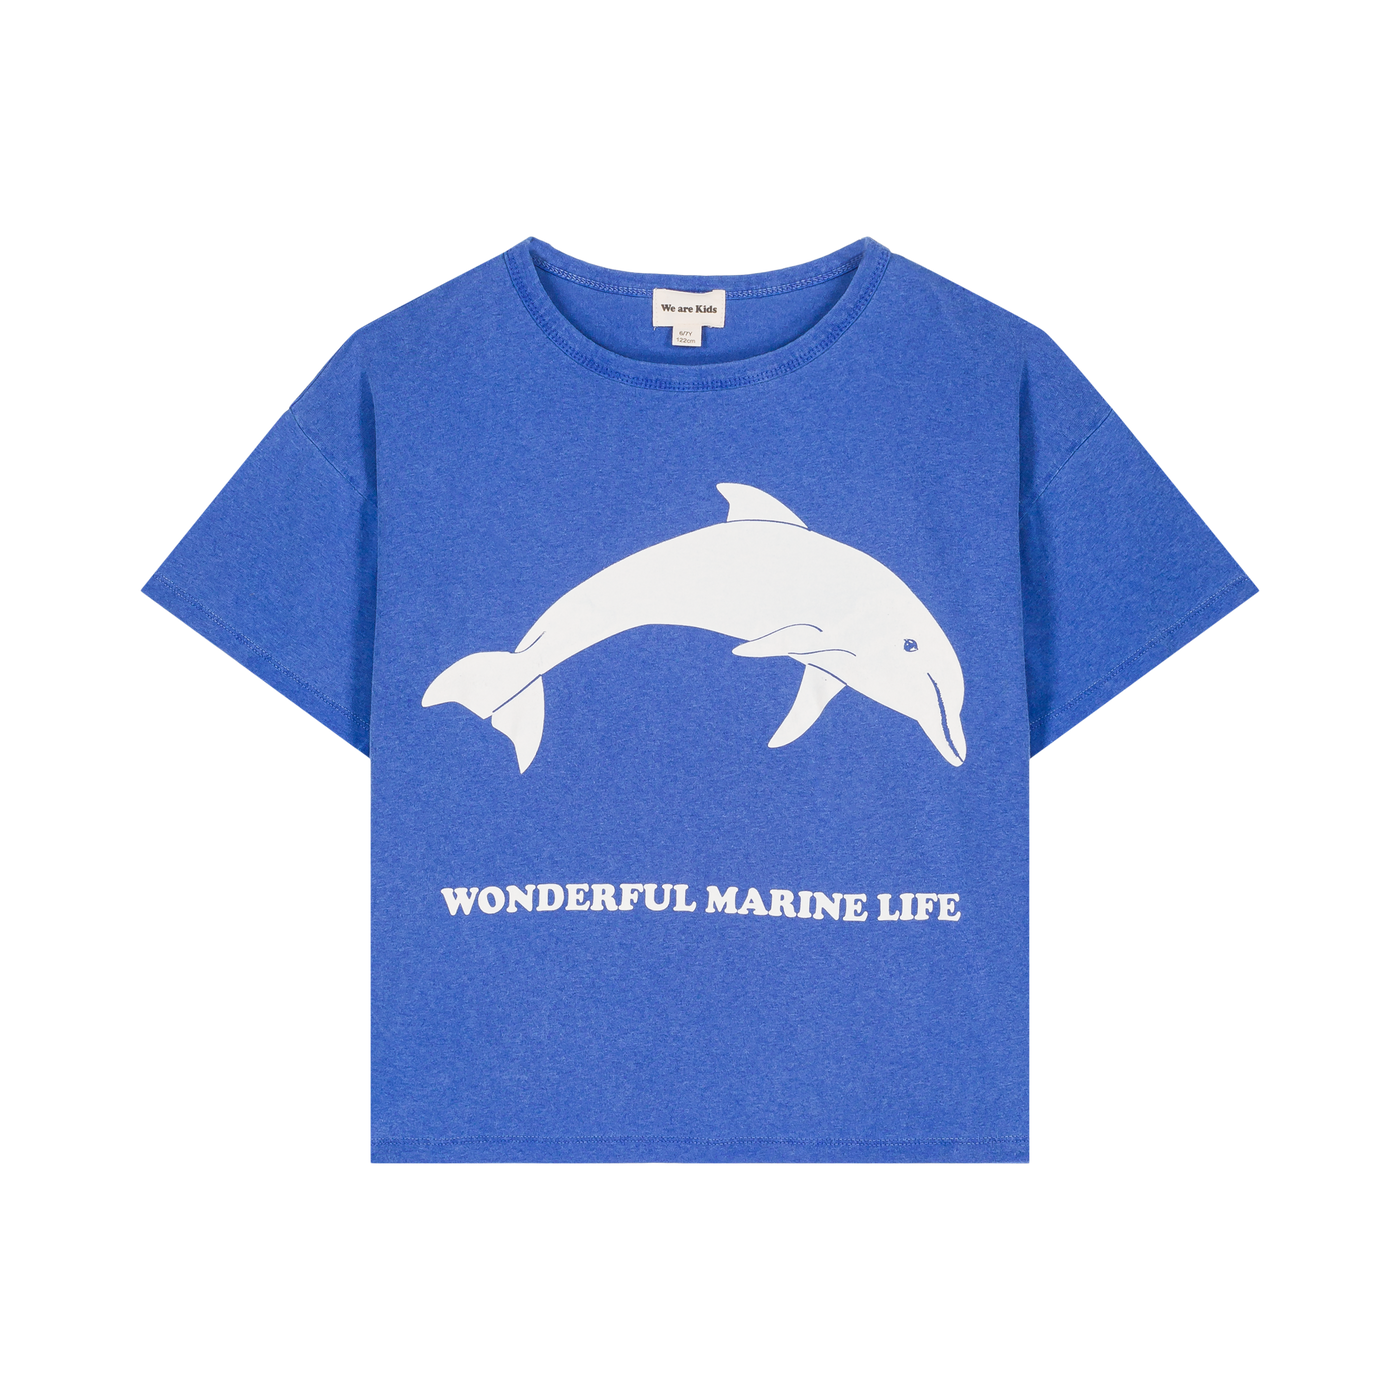 Tee Dylan kids dolphin